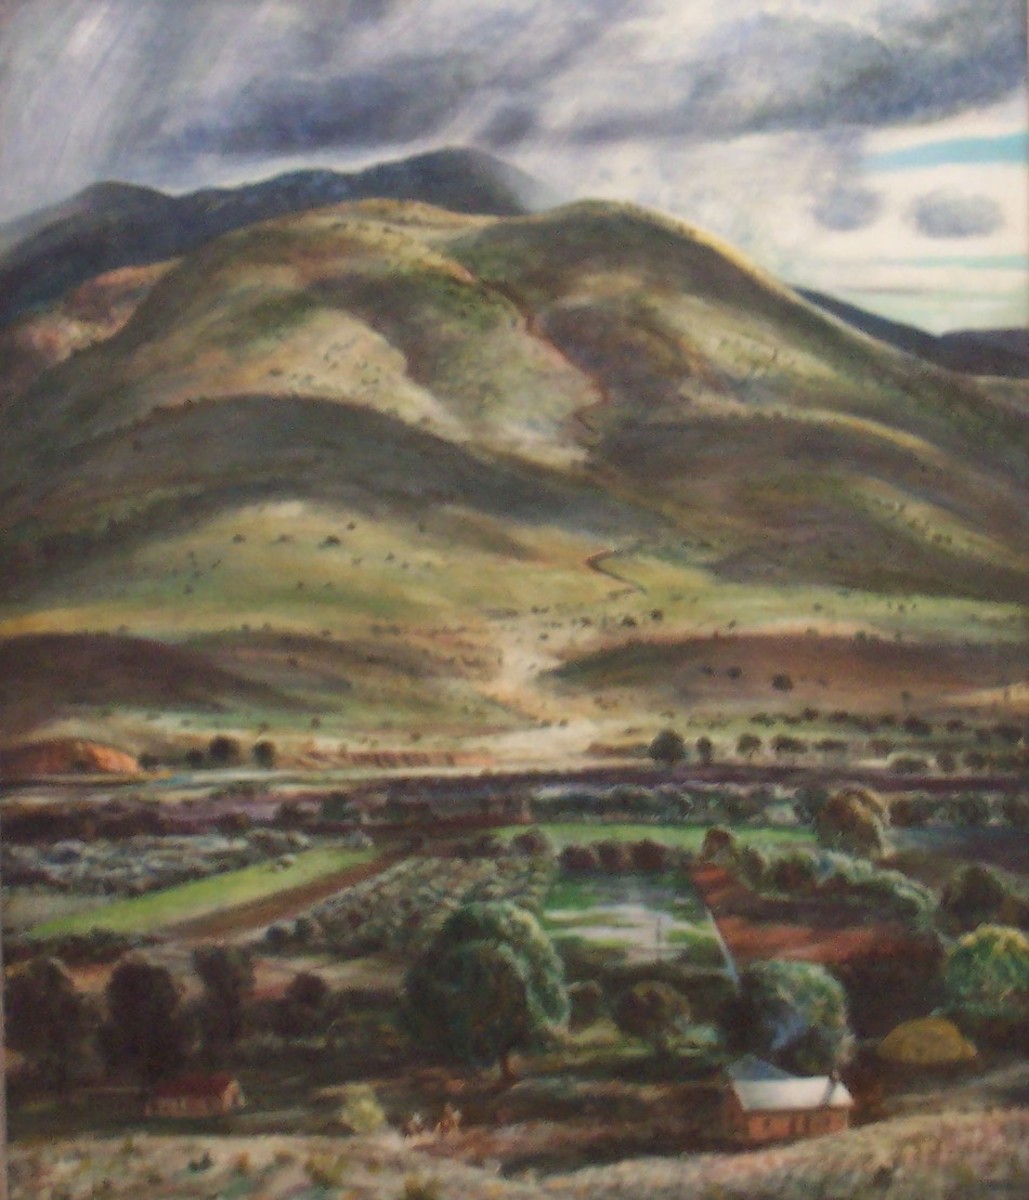 Hondo Valley Landscape from the Roswell Museum and Art Center collection